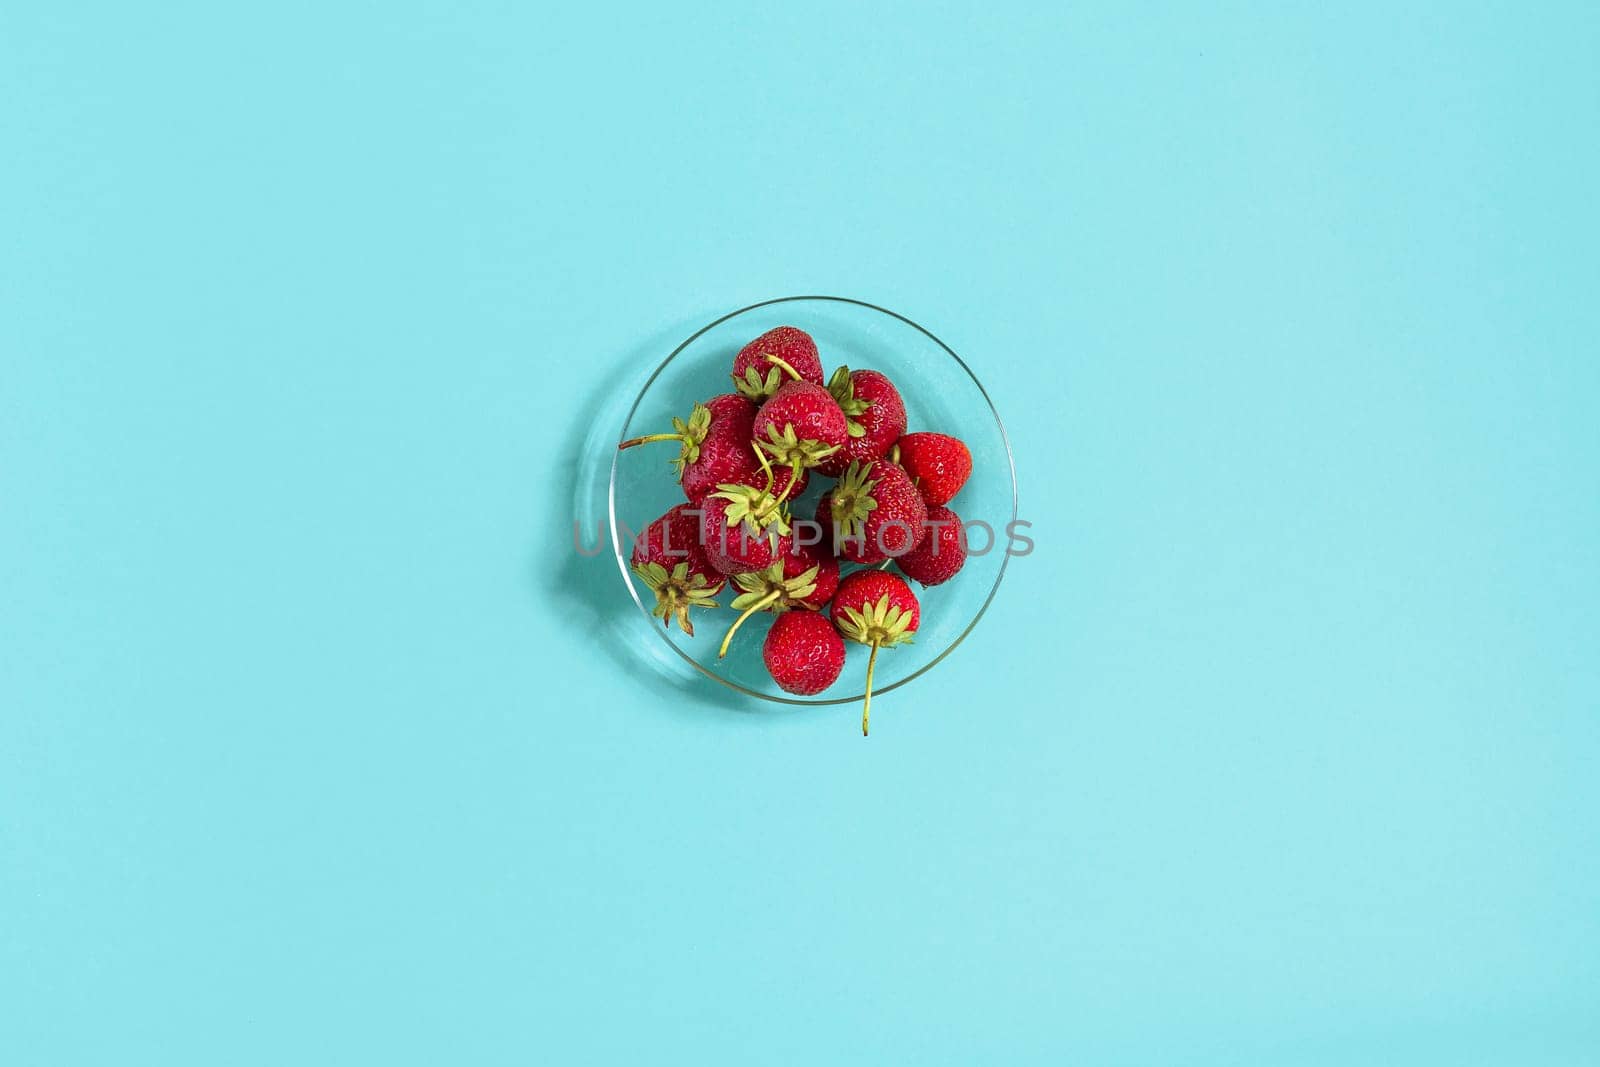 Ripe strawberries on the saucer isolated on mint background. Top view. Copy space. Still life mockup flat lay